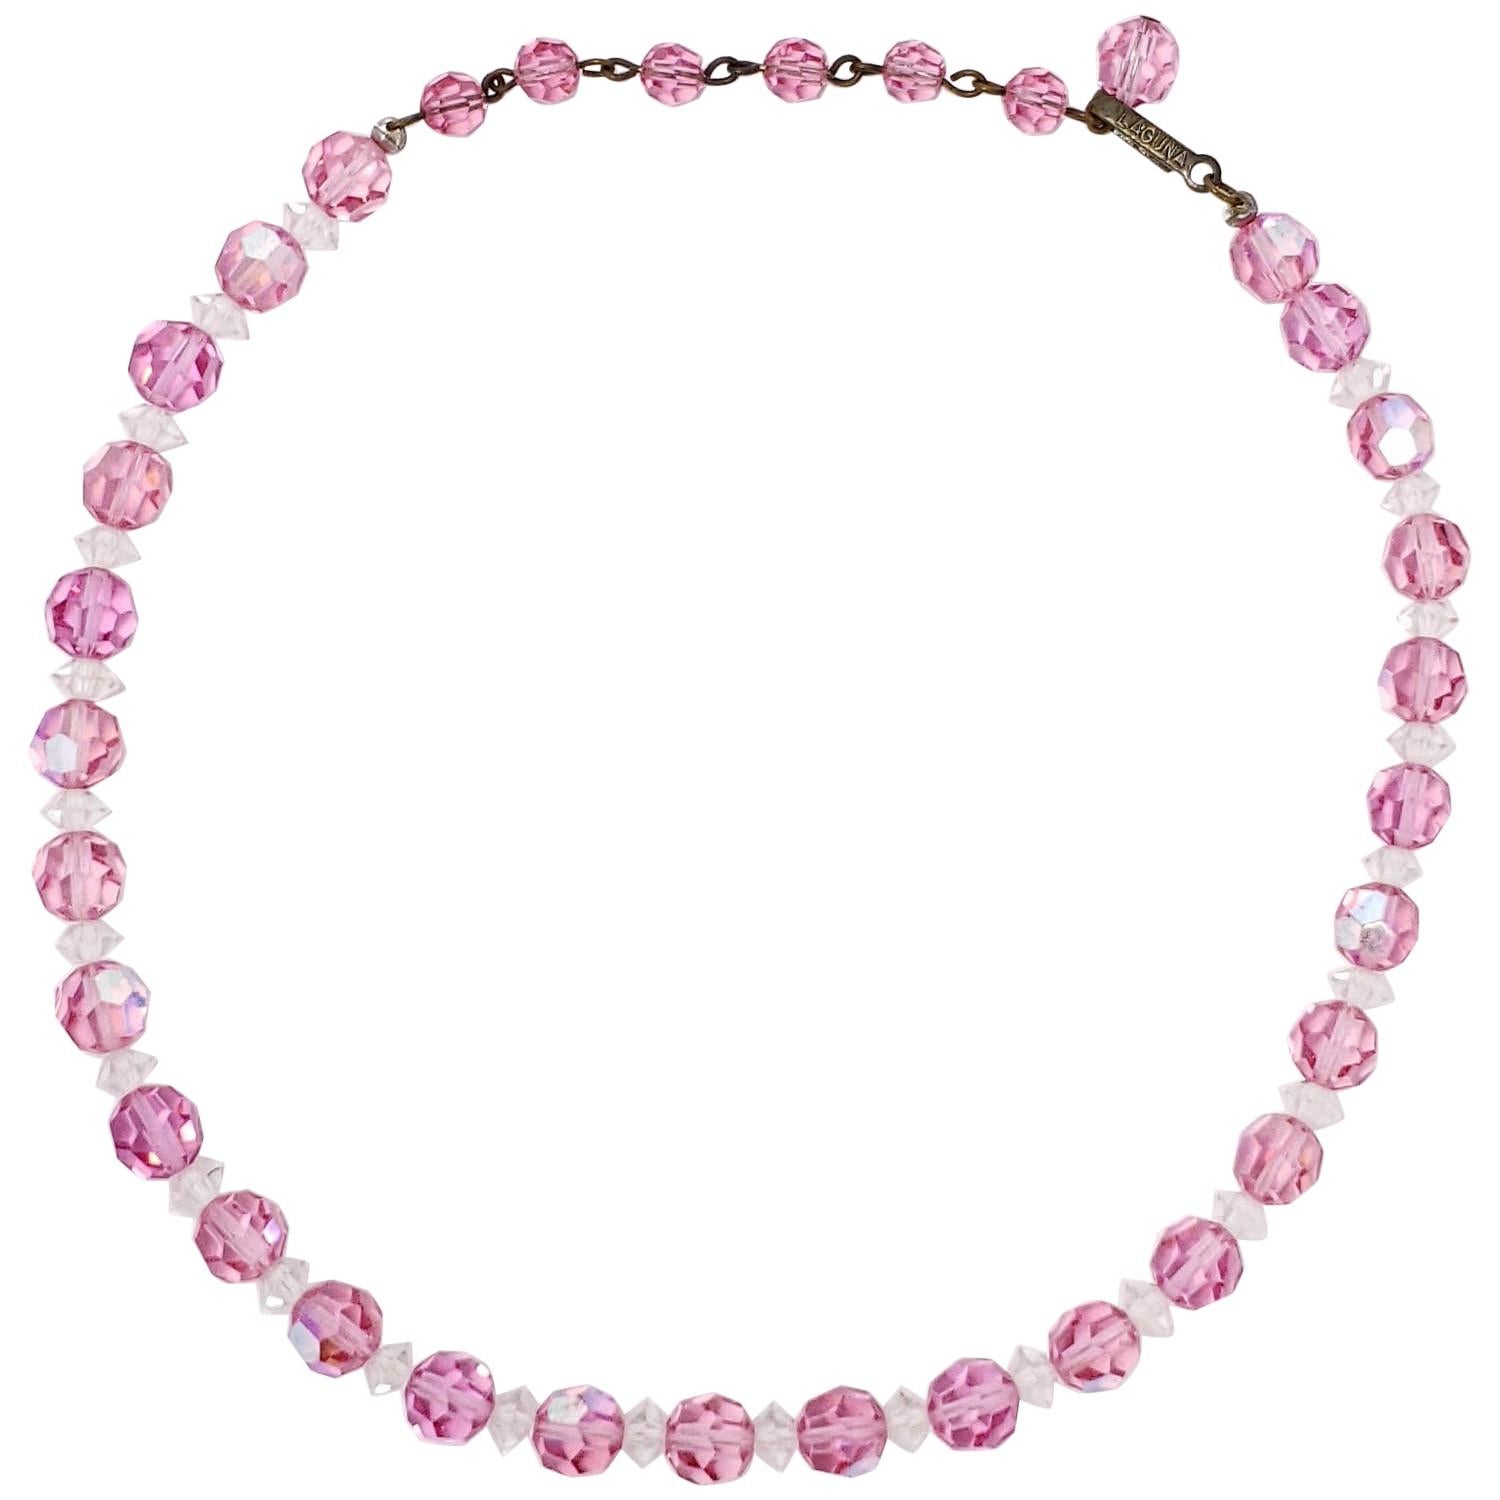 Laguna Pink Rose Faceted Crystal Bead Necklace with Vintage Brass Hook Clasp For Sale